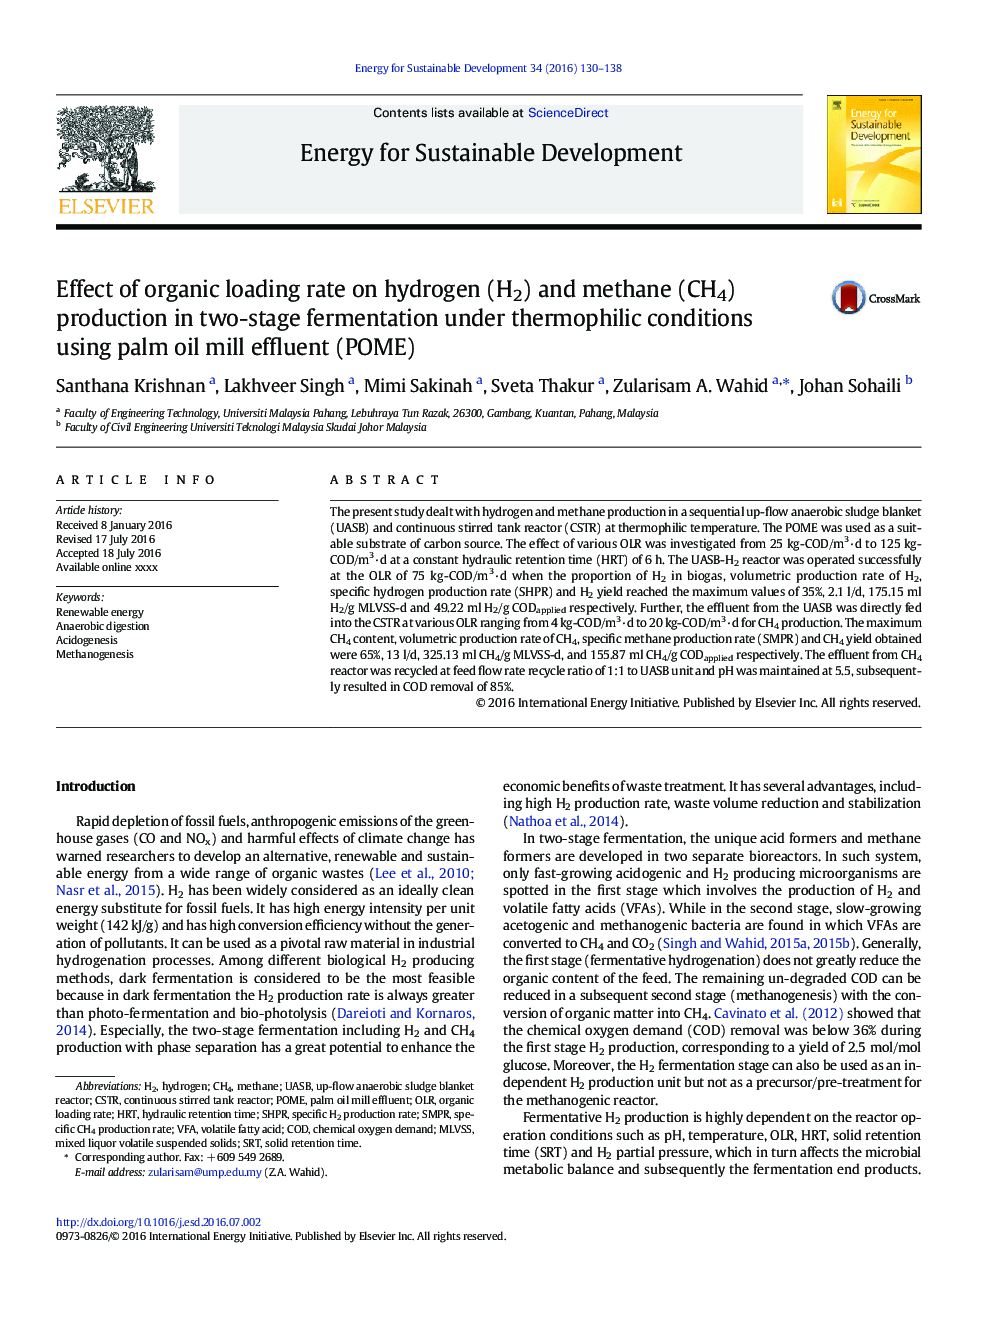 Effect of organic loading rate on hydrogen (H2) and methane (CH4) production in two-stage fermentation under thermophilic conditions using palm oil mill effluent (POME)